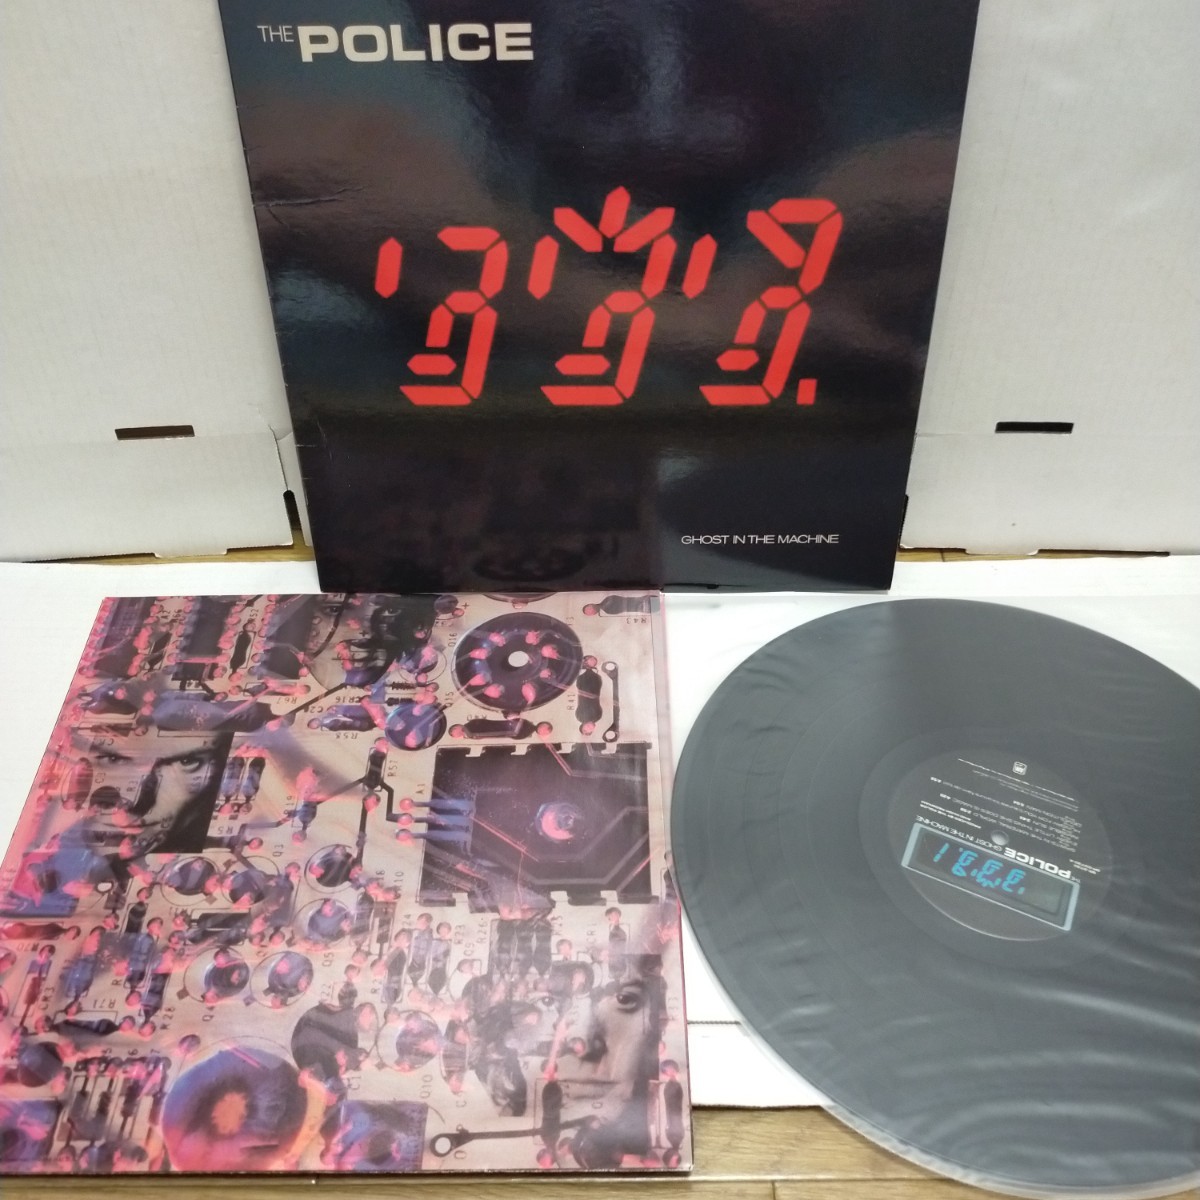 US ORG盤LP/THE POLICE ポリス/GHOST IN THE MACHINE/A＆M SP-3730 US ORIGINAL テカりJKT仕様/両面にSTERLING刻印有/STING スティング_画像7